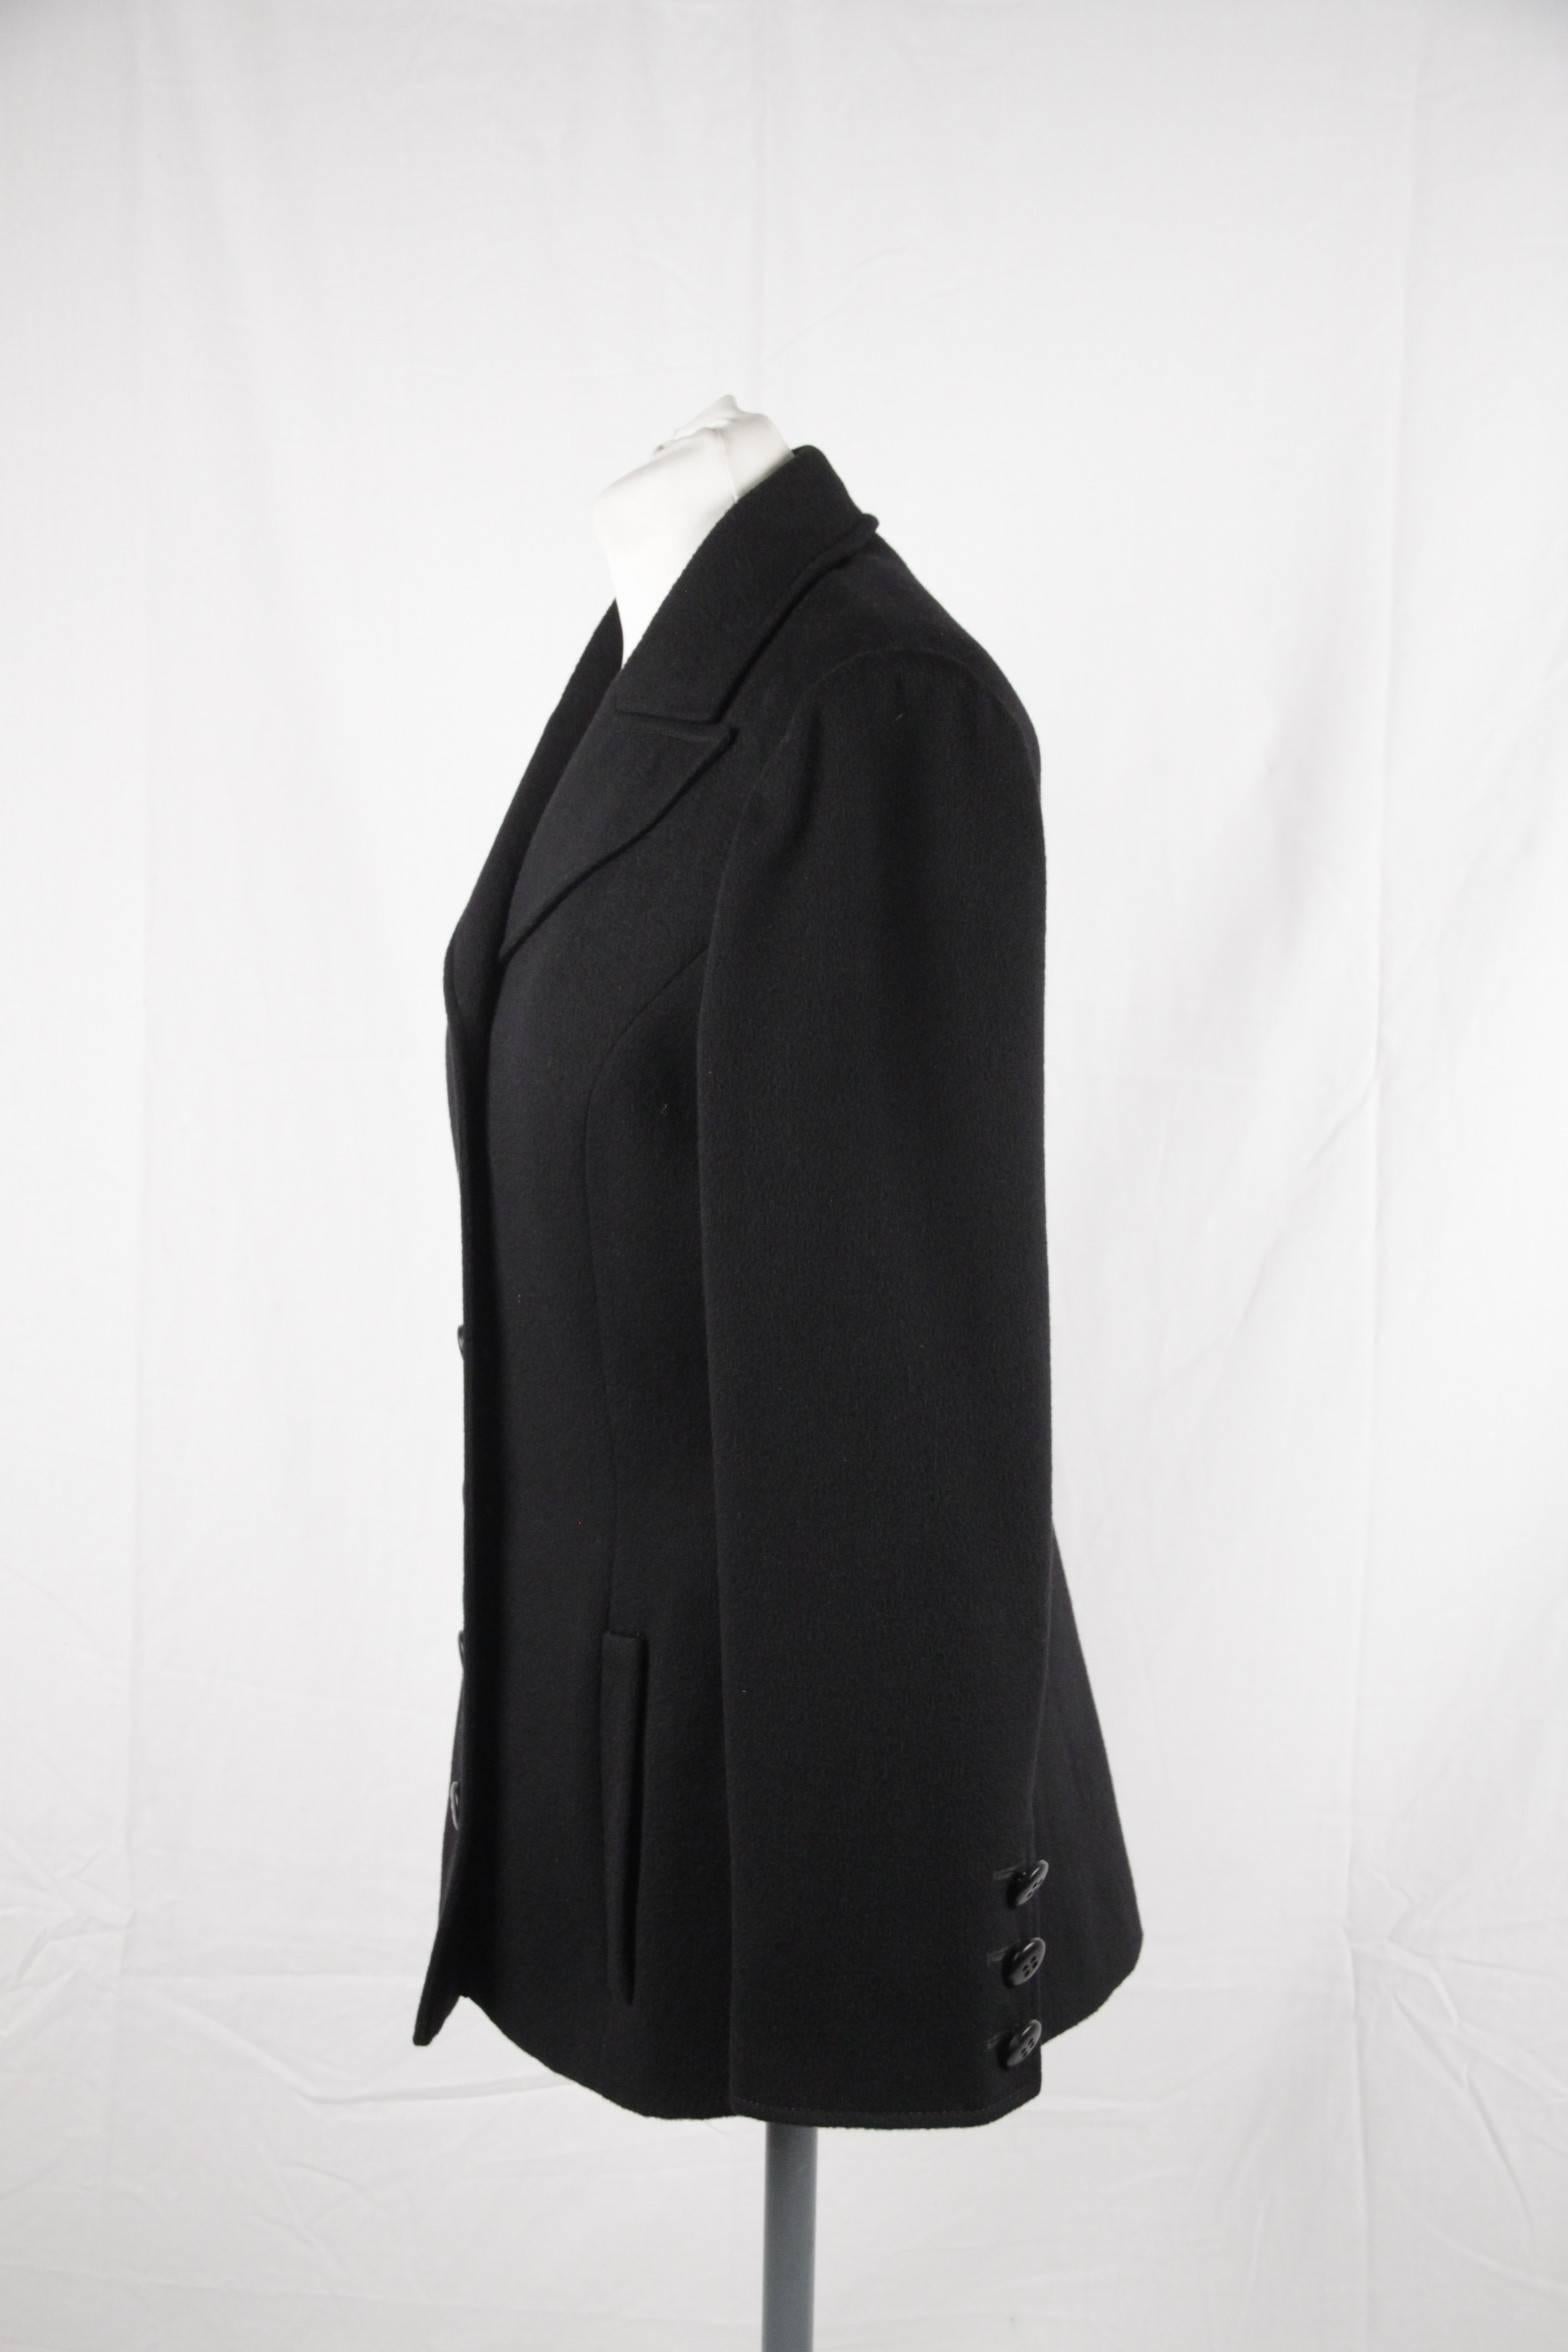 VALENTINO BOUTIQUE Vintage Black Wool BLAZER Jacket SIZE 6 GT In Good Condition In Rome, Rome